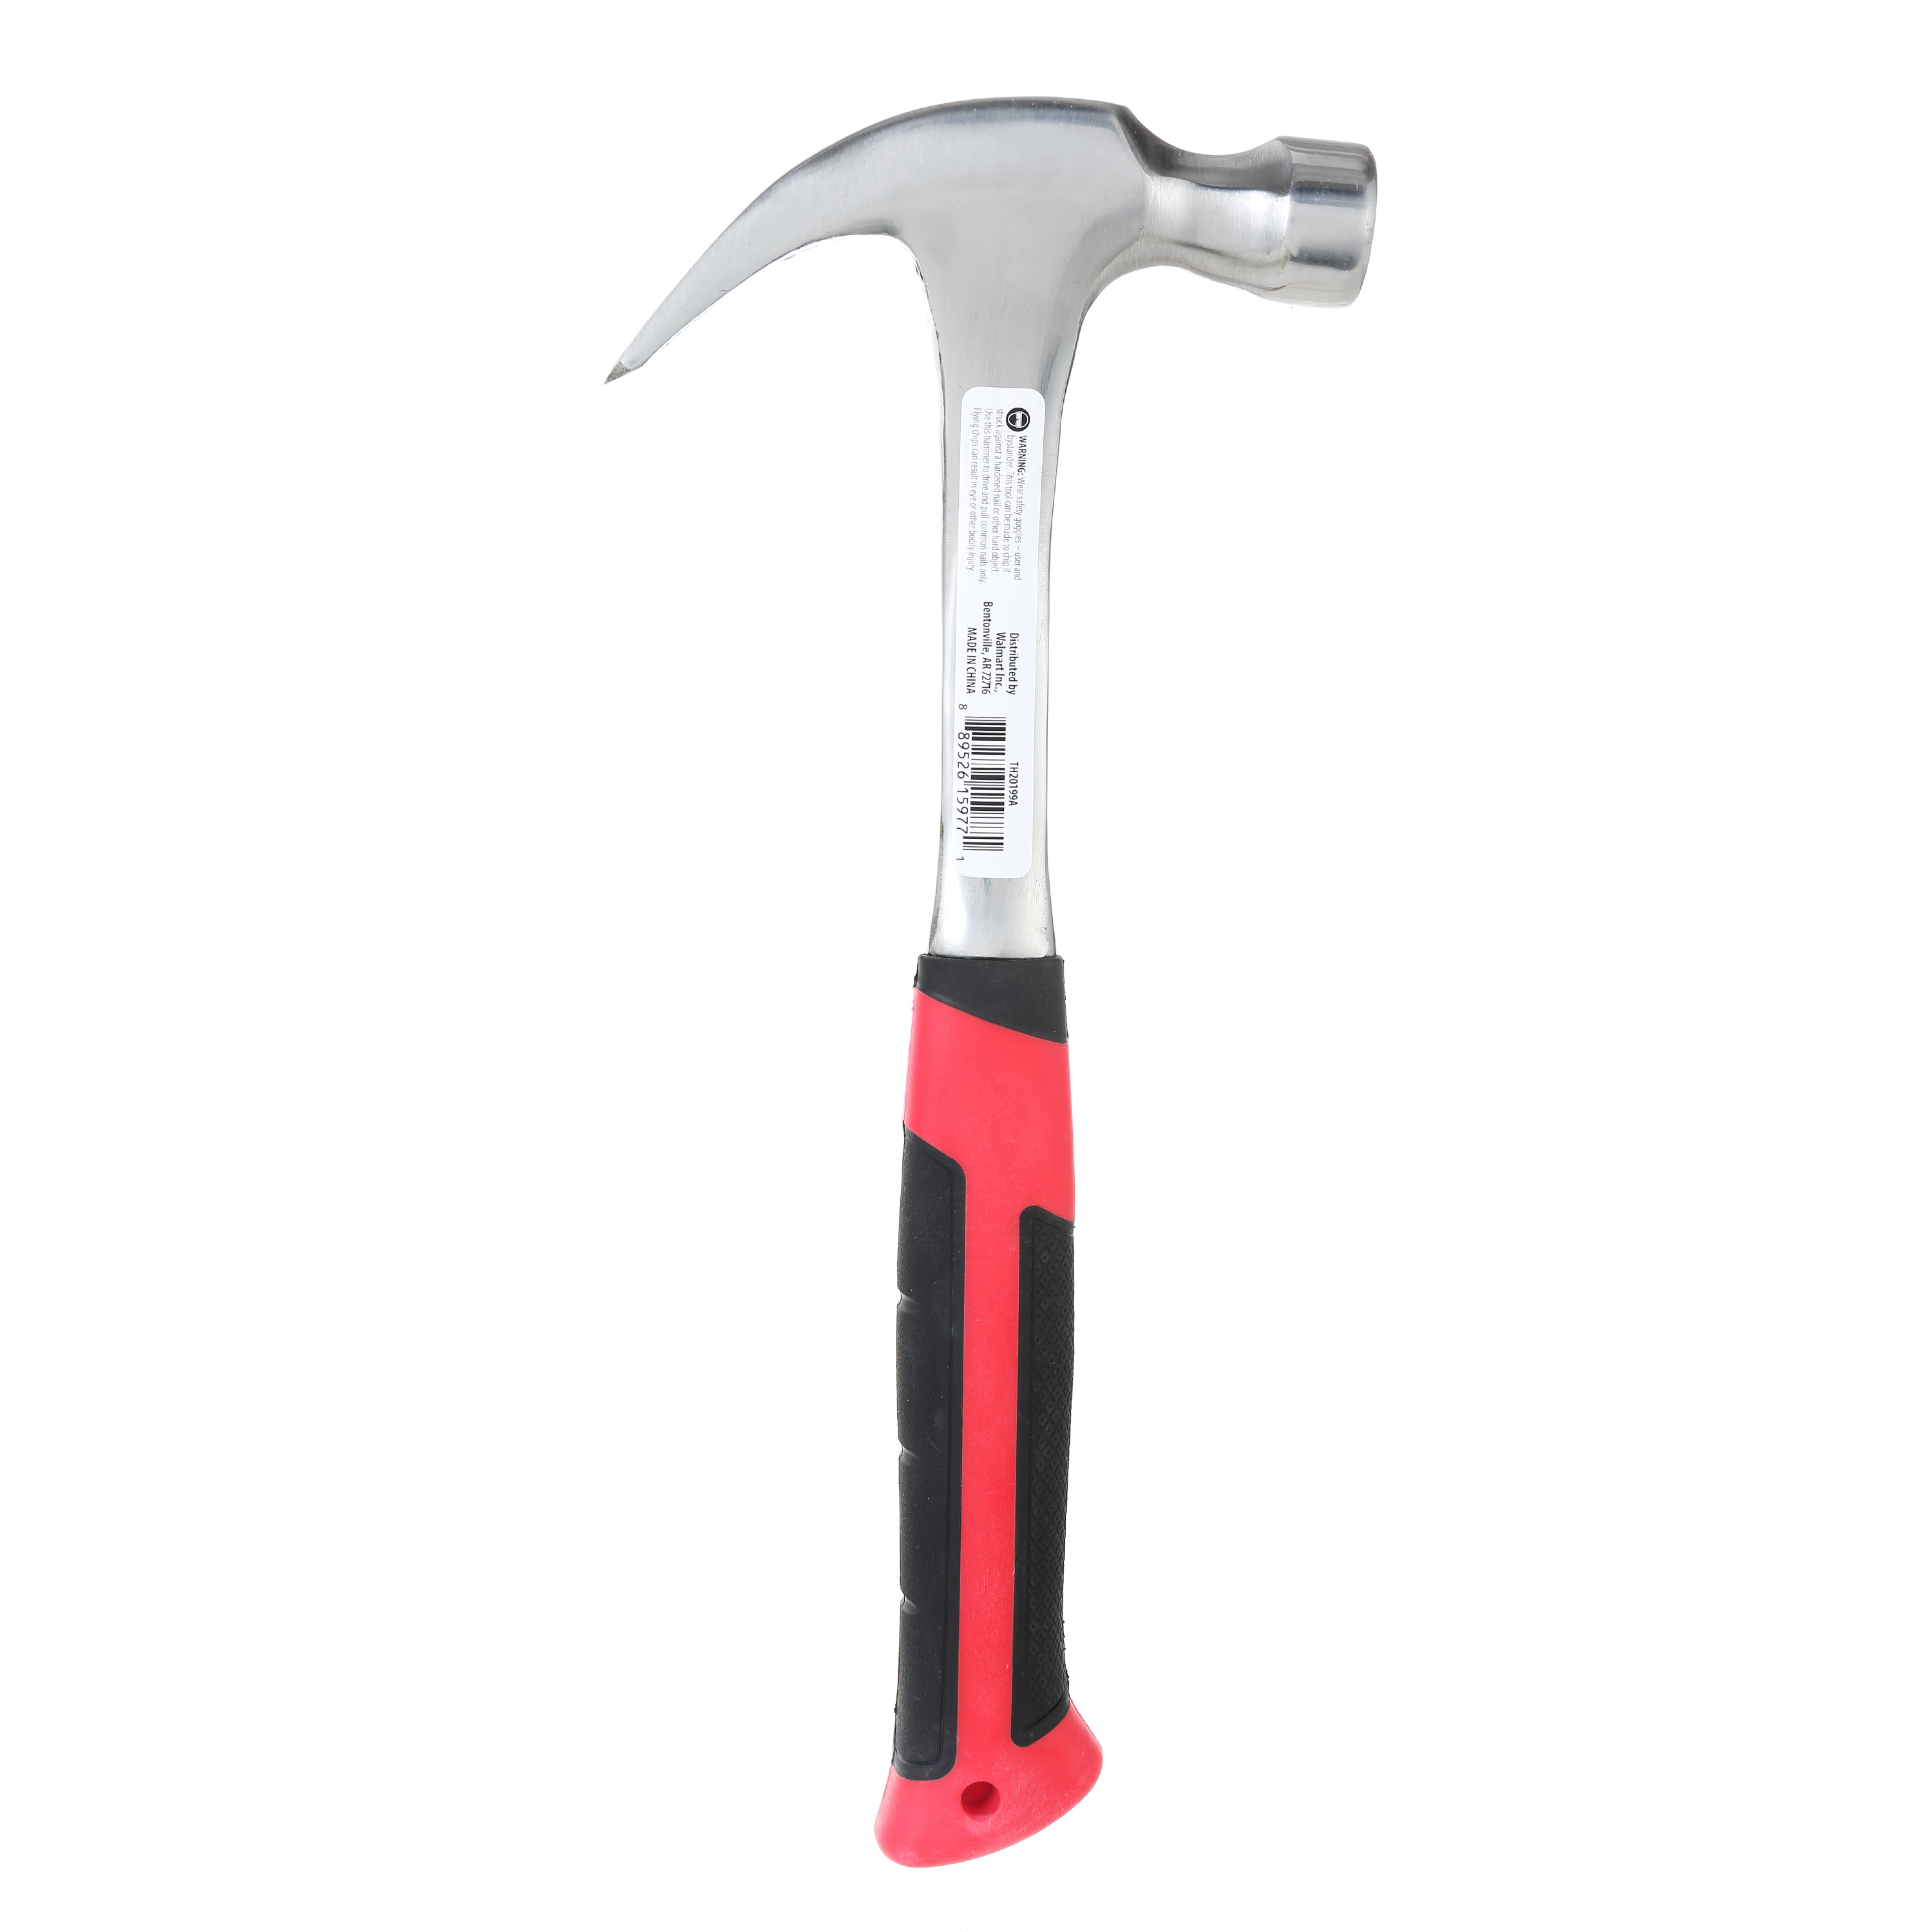 Hyper Tough 20 oz. Steel Shaft Claw Hammer with Comfort Grip TH20199A - image 5 of 12